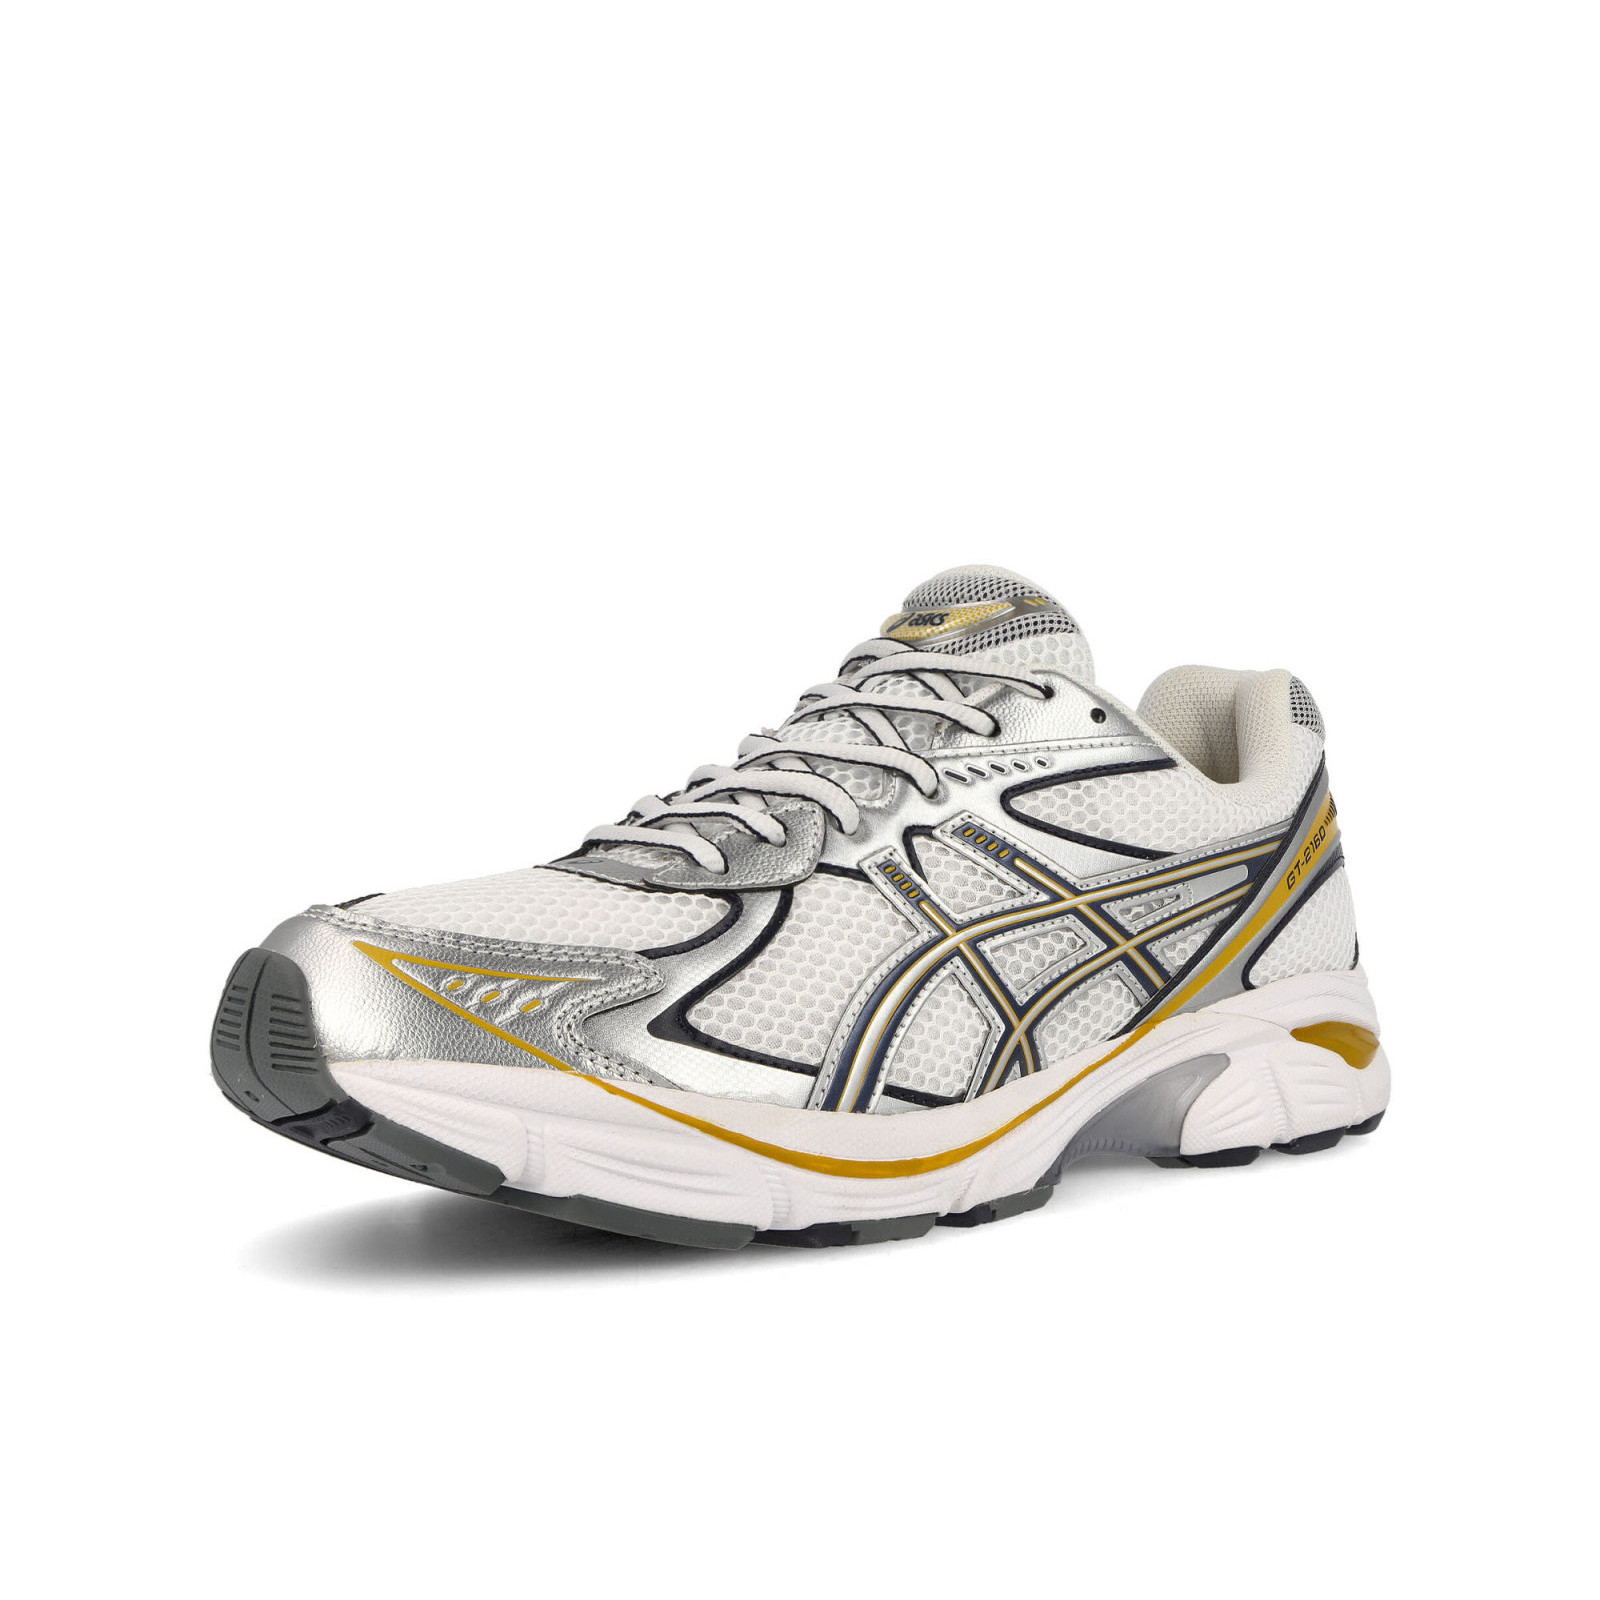 Asics GT-2160
White / Pure Silver